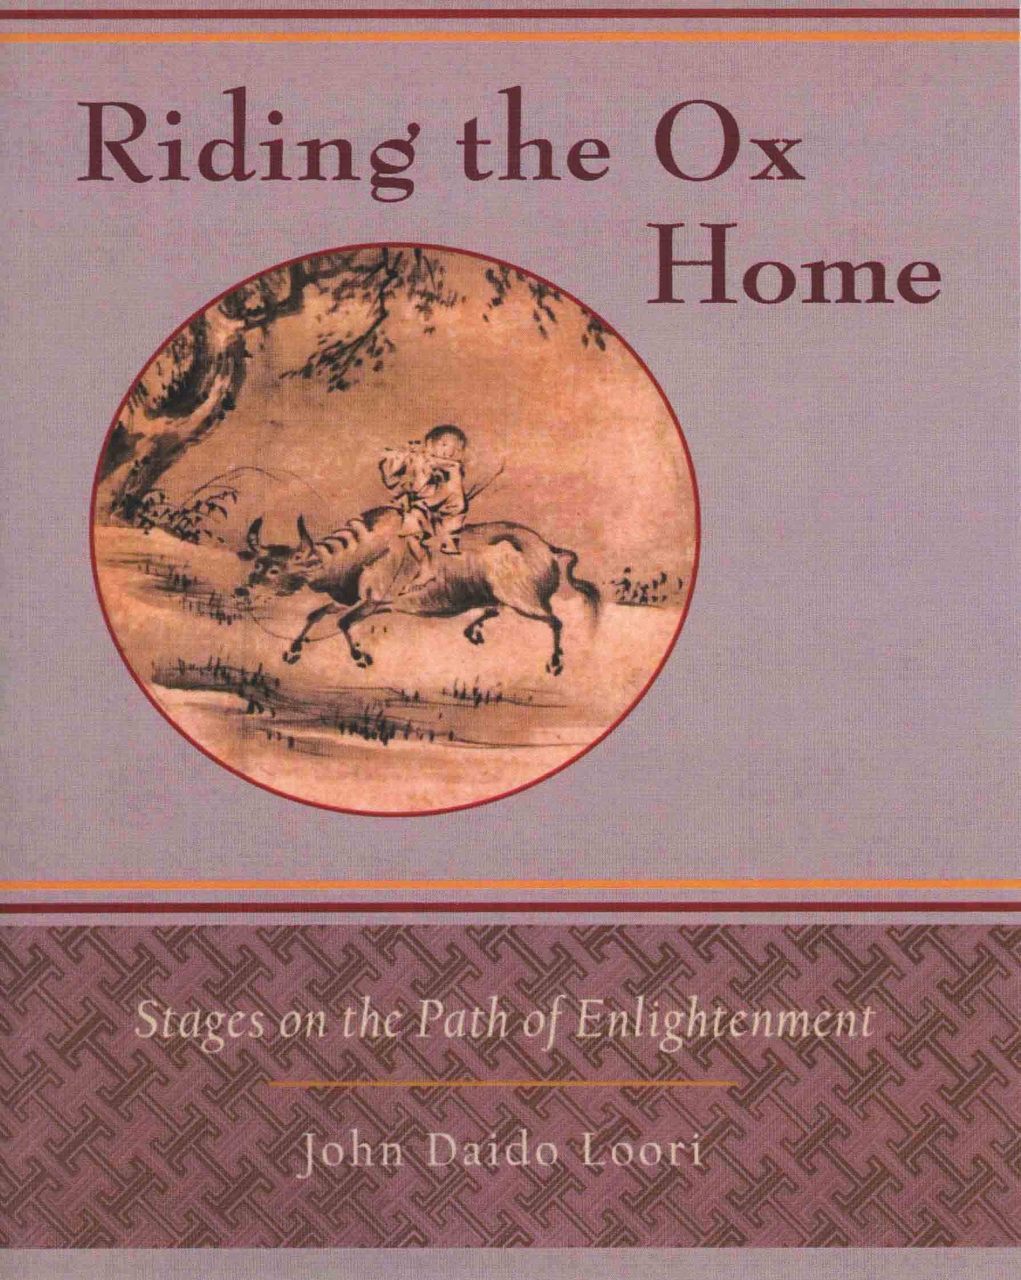 Riding the Ox Home: Stages on the Path of Enlightenment